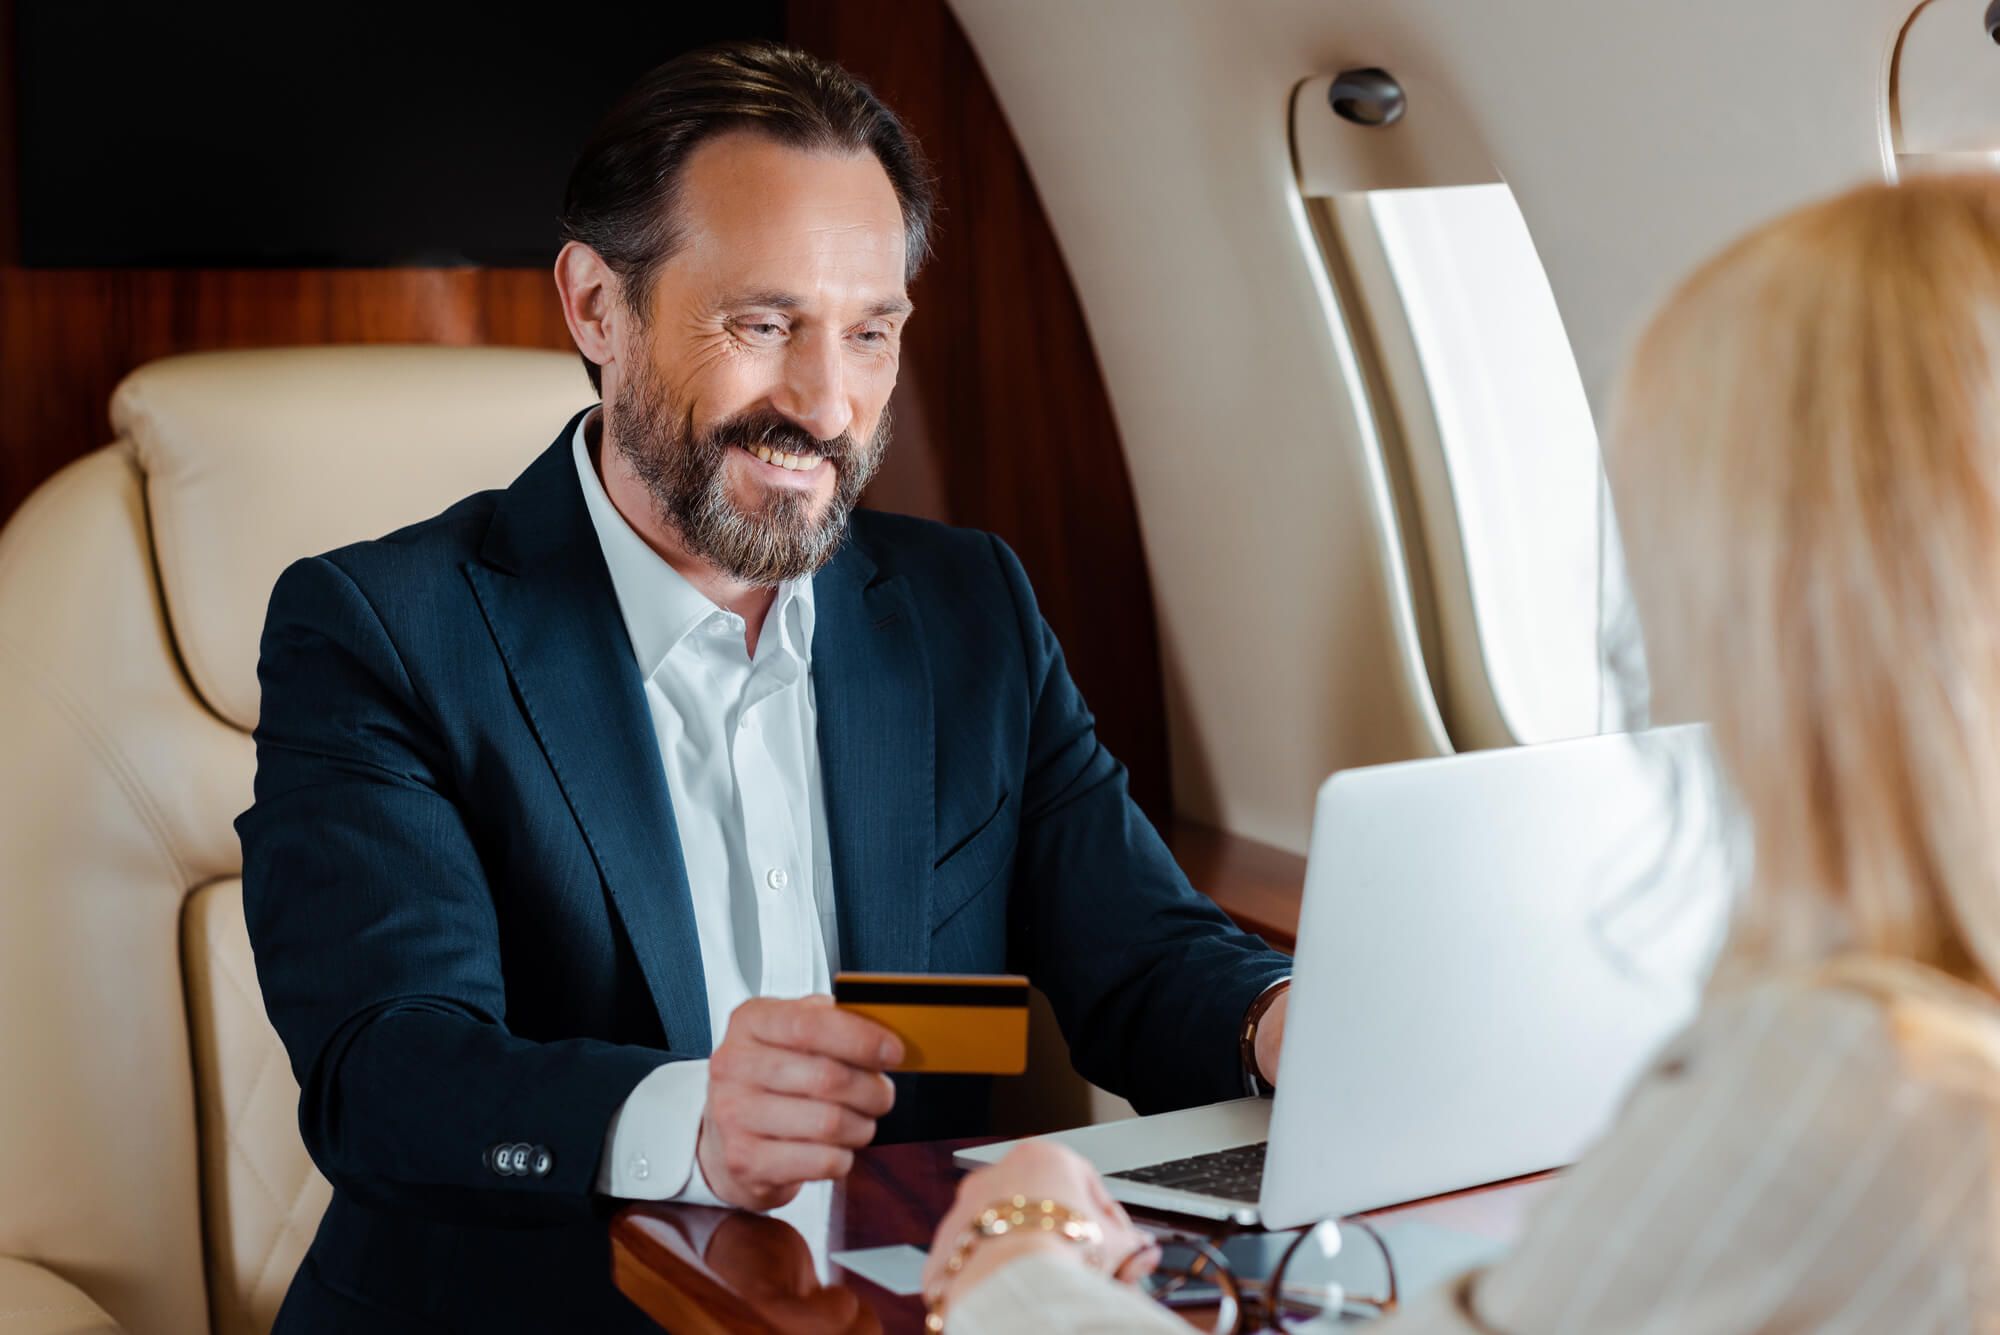 the man on the plane uses a private jet card